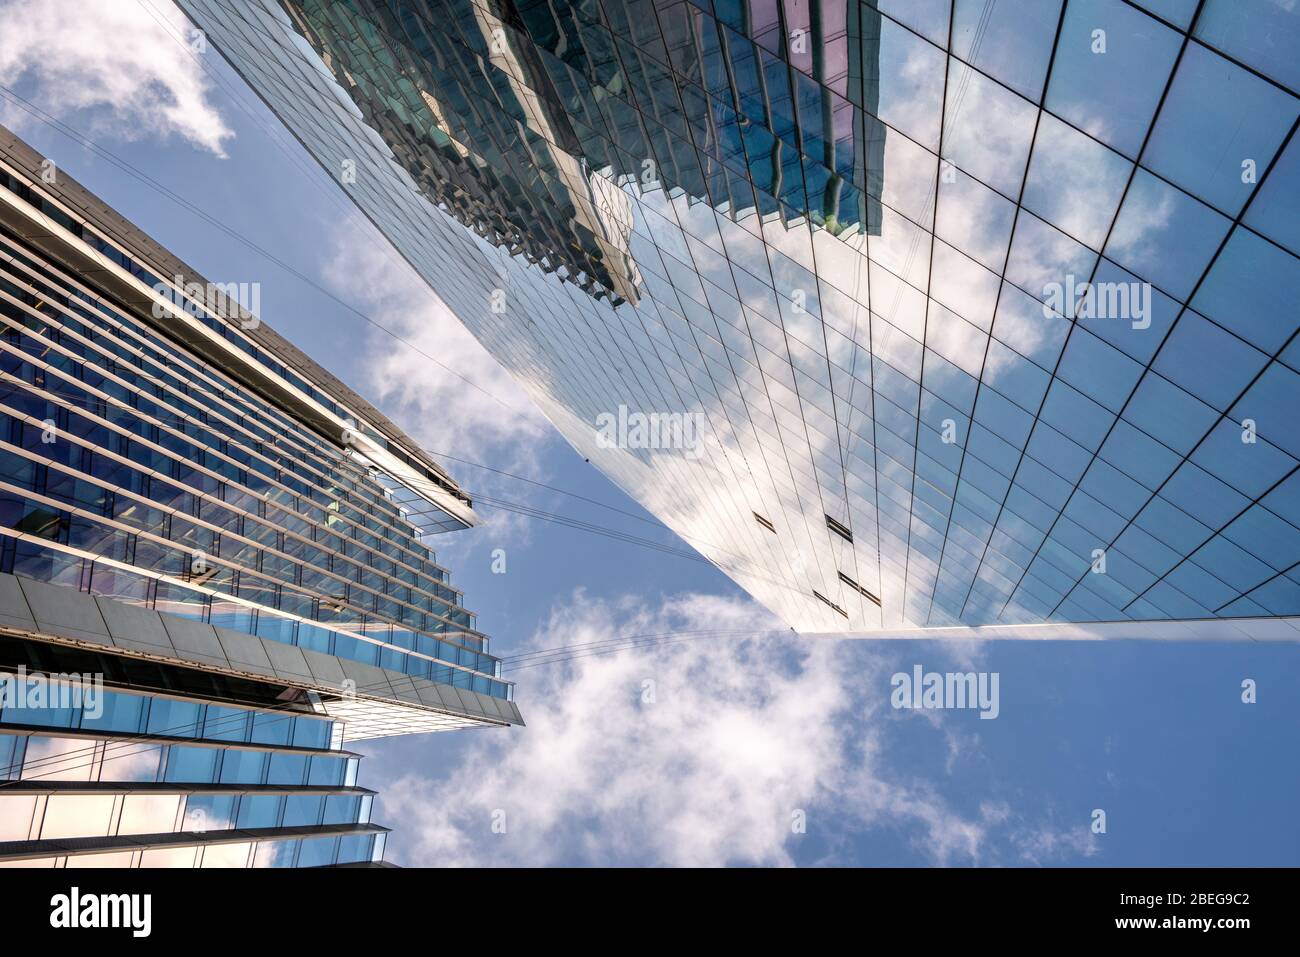 Low angle view of tall corporate glass skyscrapers reflecting a blue sky with white clouds Stock Photo